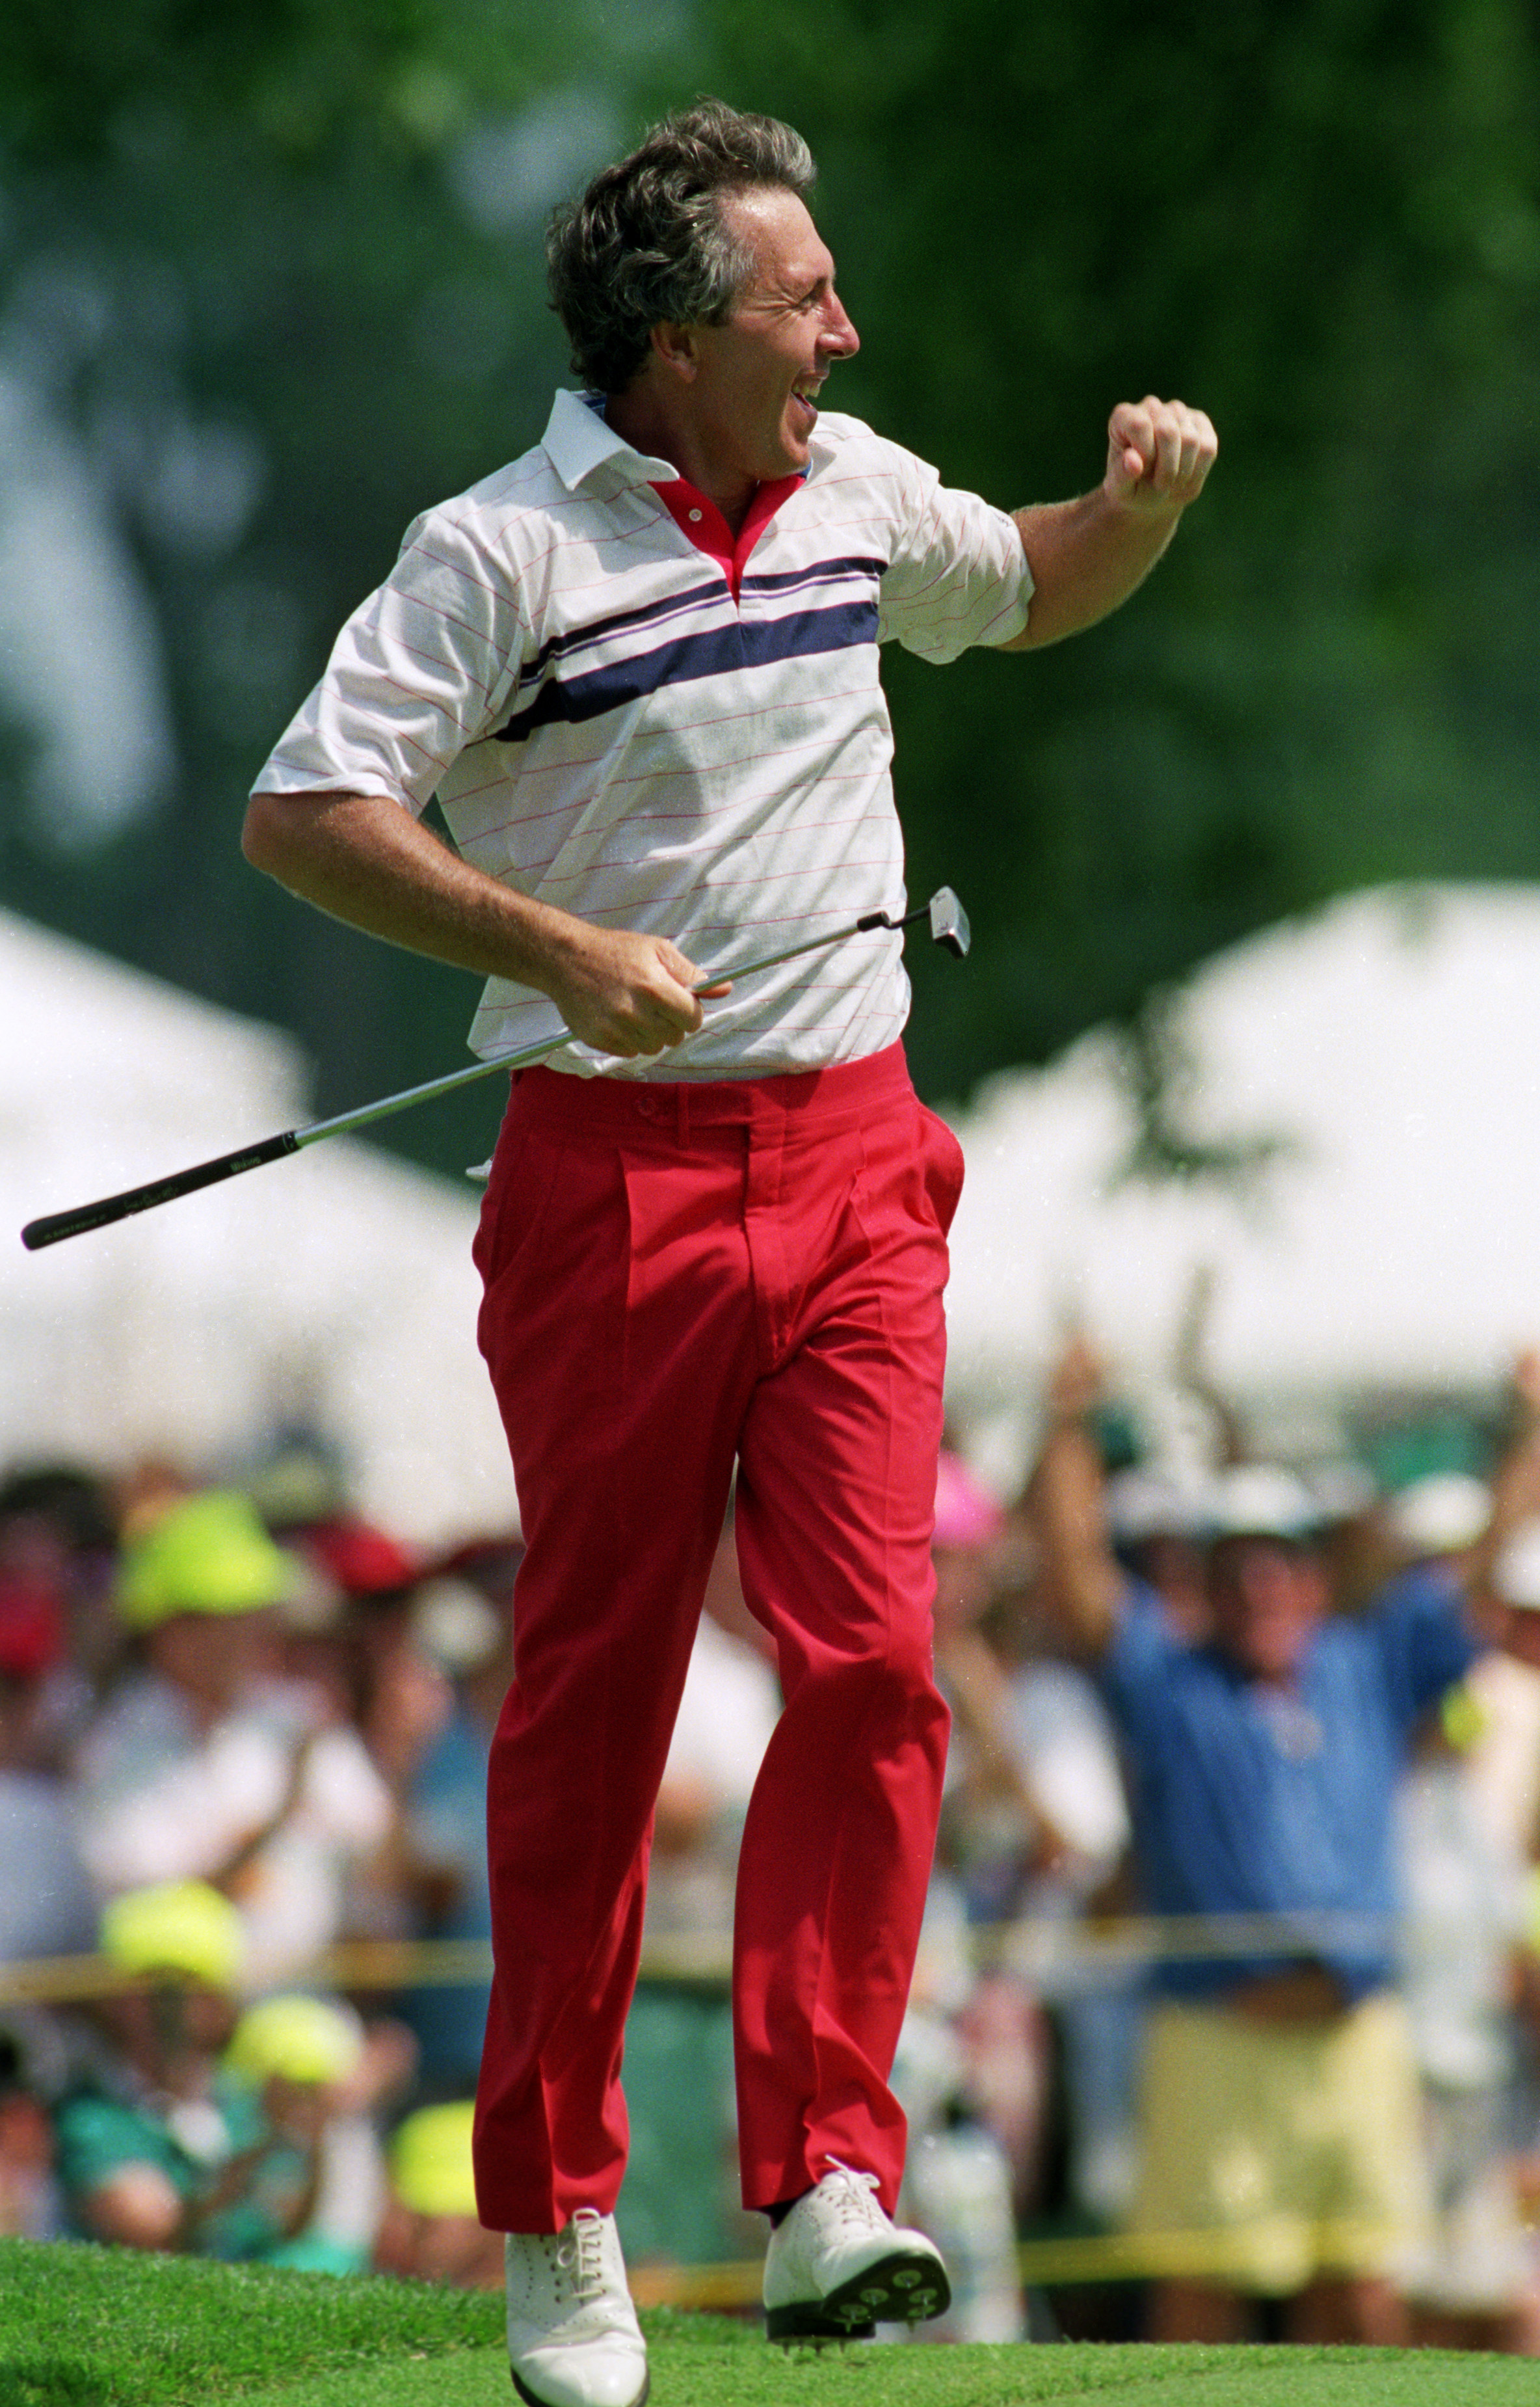 MEDINAH - JUNE:  Hale Irwin of the USA birdies the 18th to secure a play-off spot in the US Open at Medinah Country Club in Medinah, Illinois, USA in June 1990. Irwin went on to beat Mike Donald in the play-off. (photo by Stephen Munday/Getty Images)